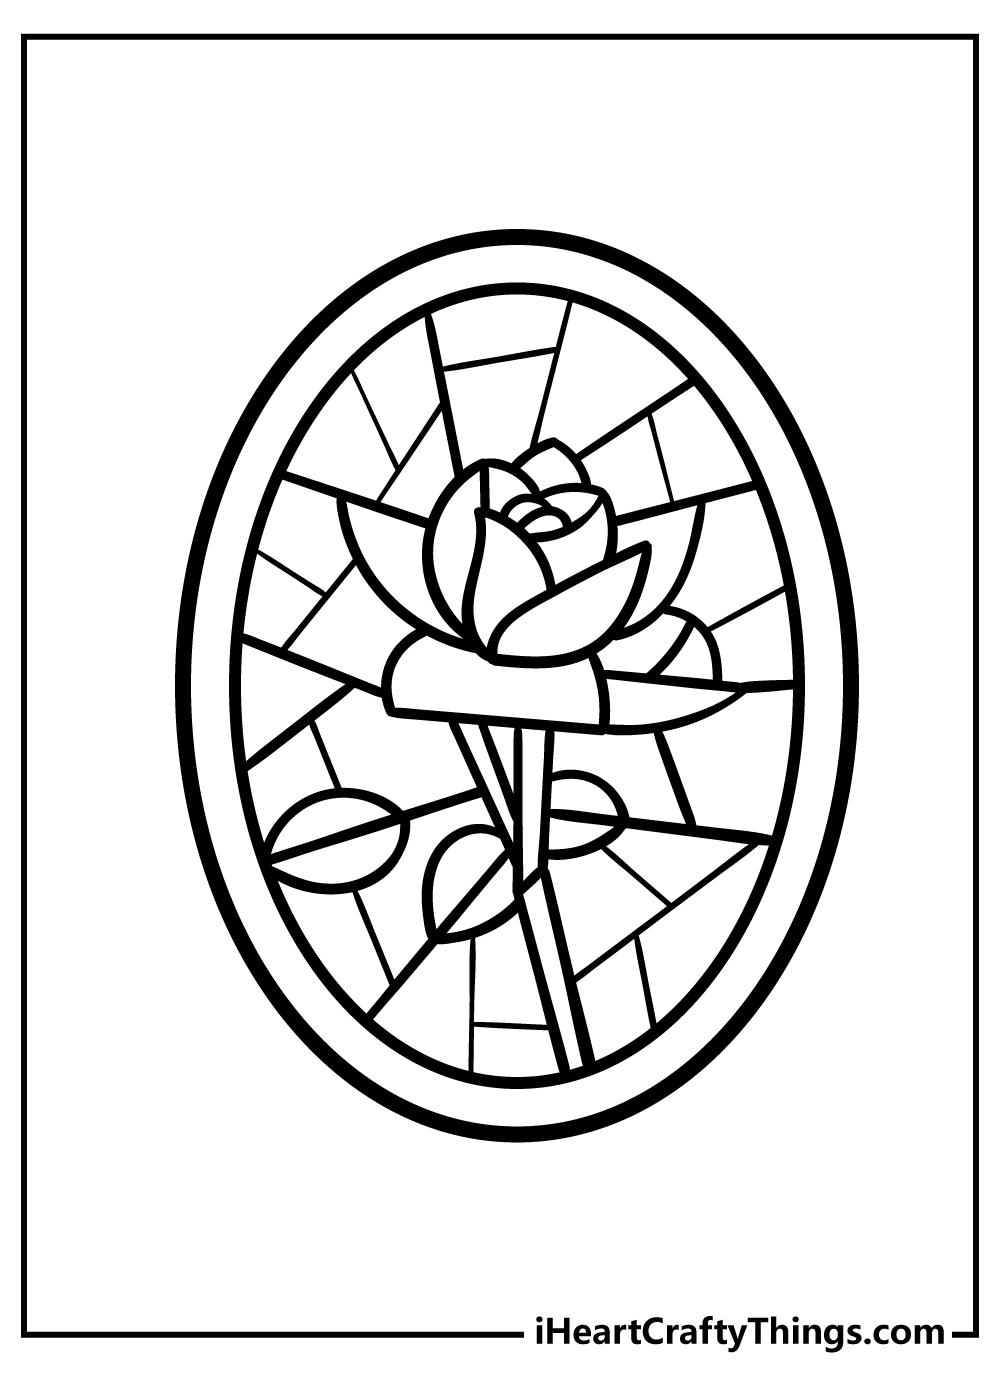 Stained glass pages free printables